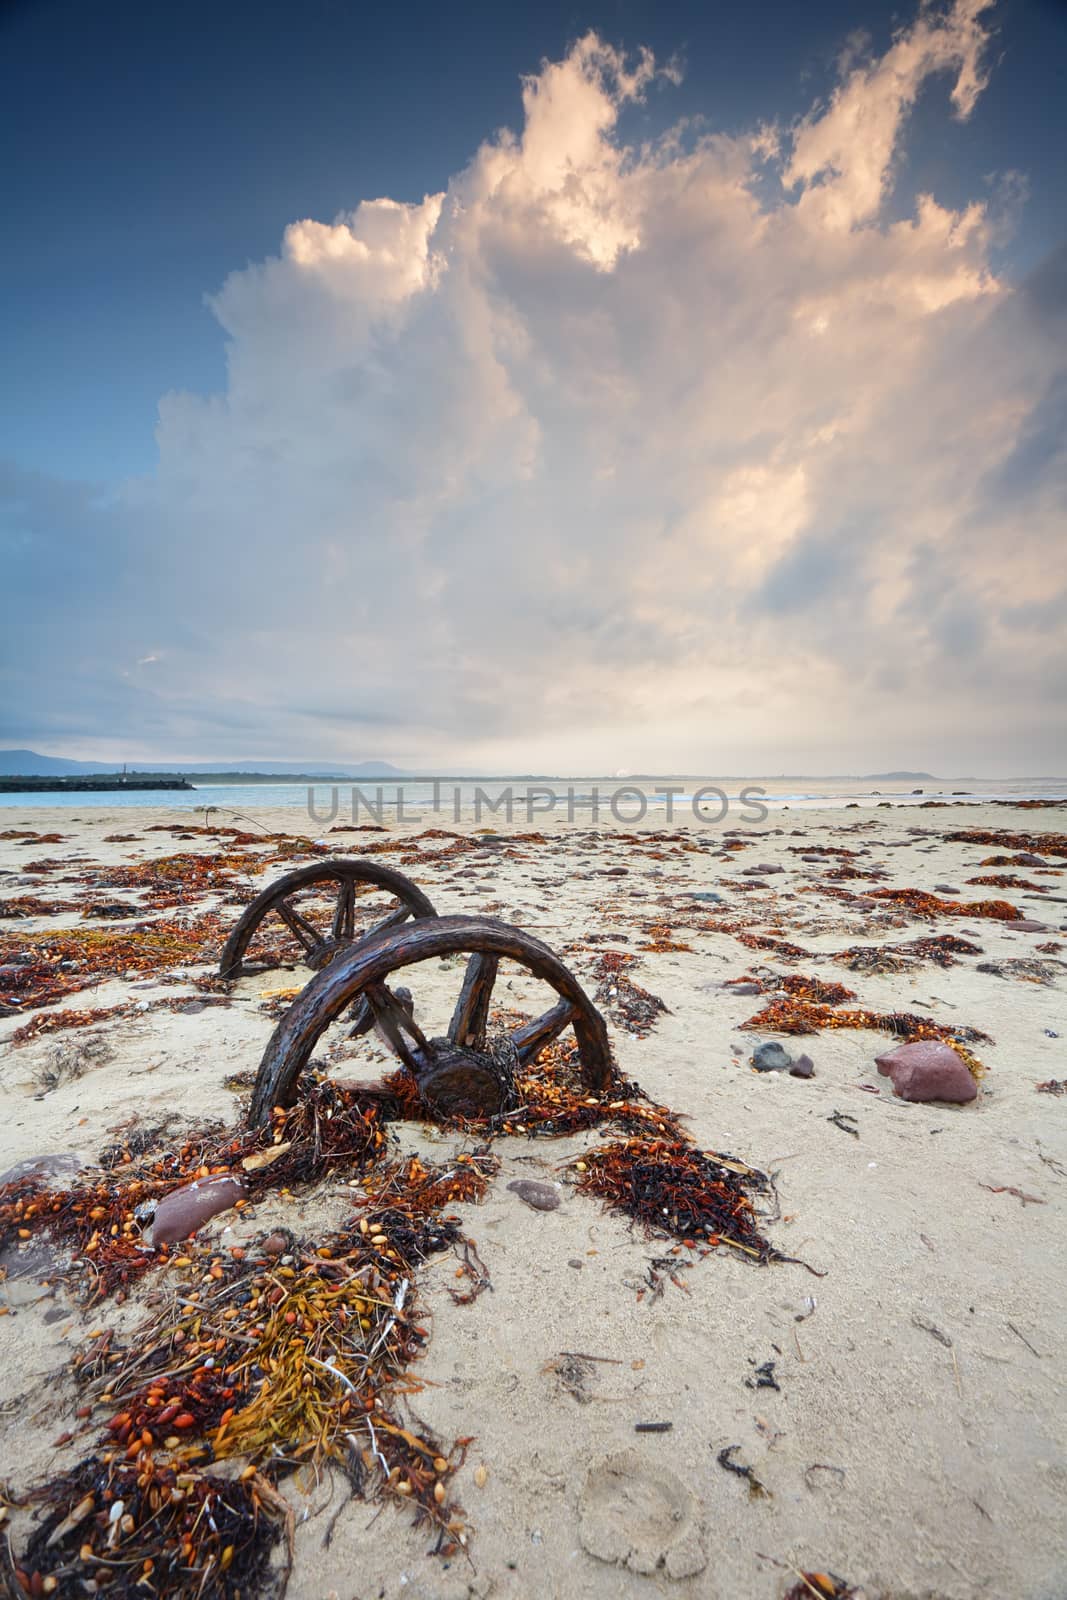 Rusty wheels in the sand by lovleah